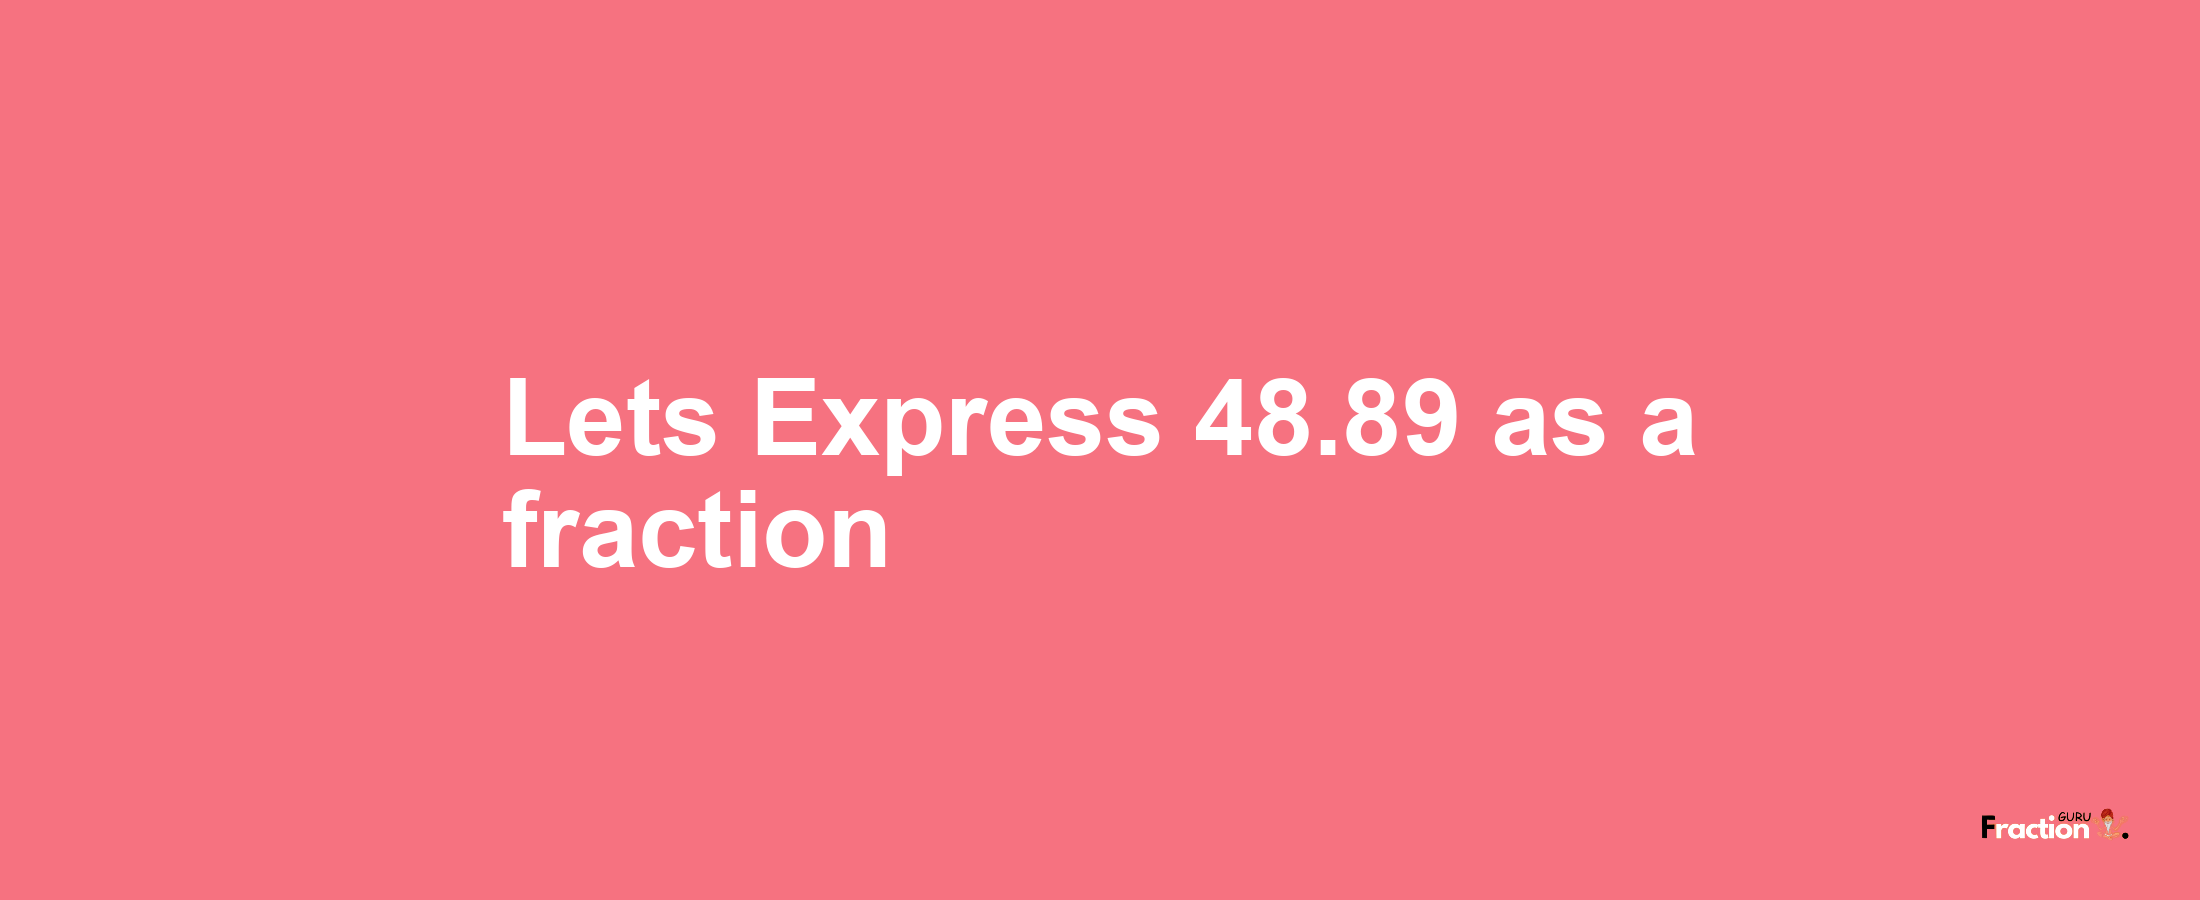 Lets Express 48.89 as afraction